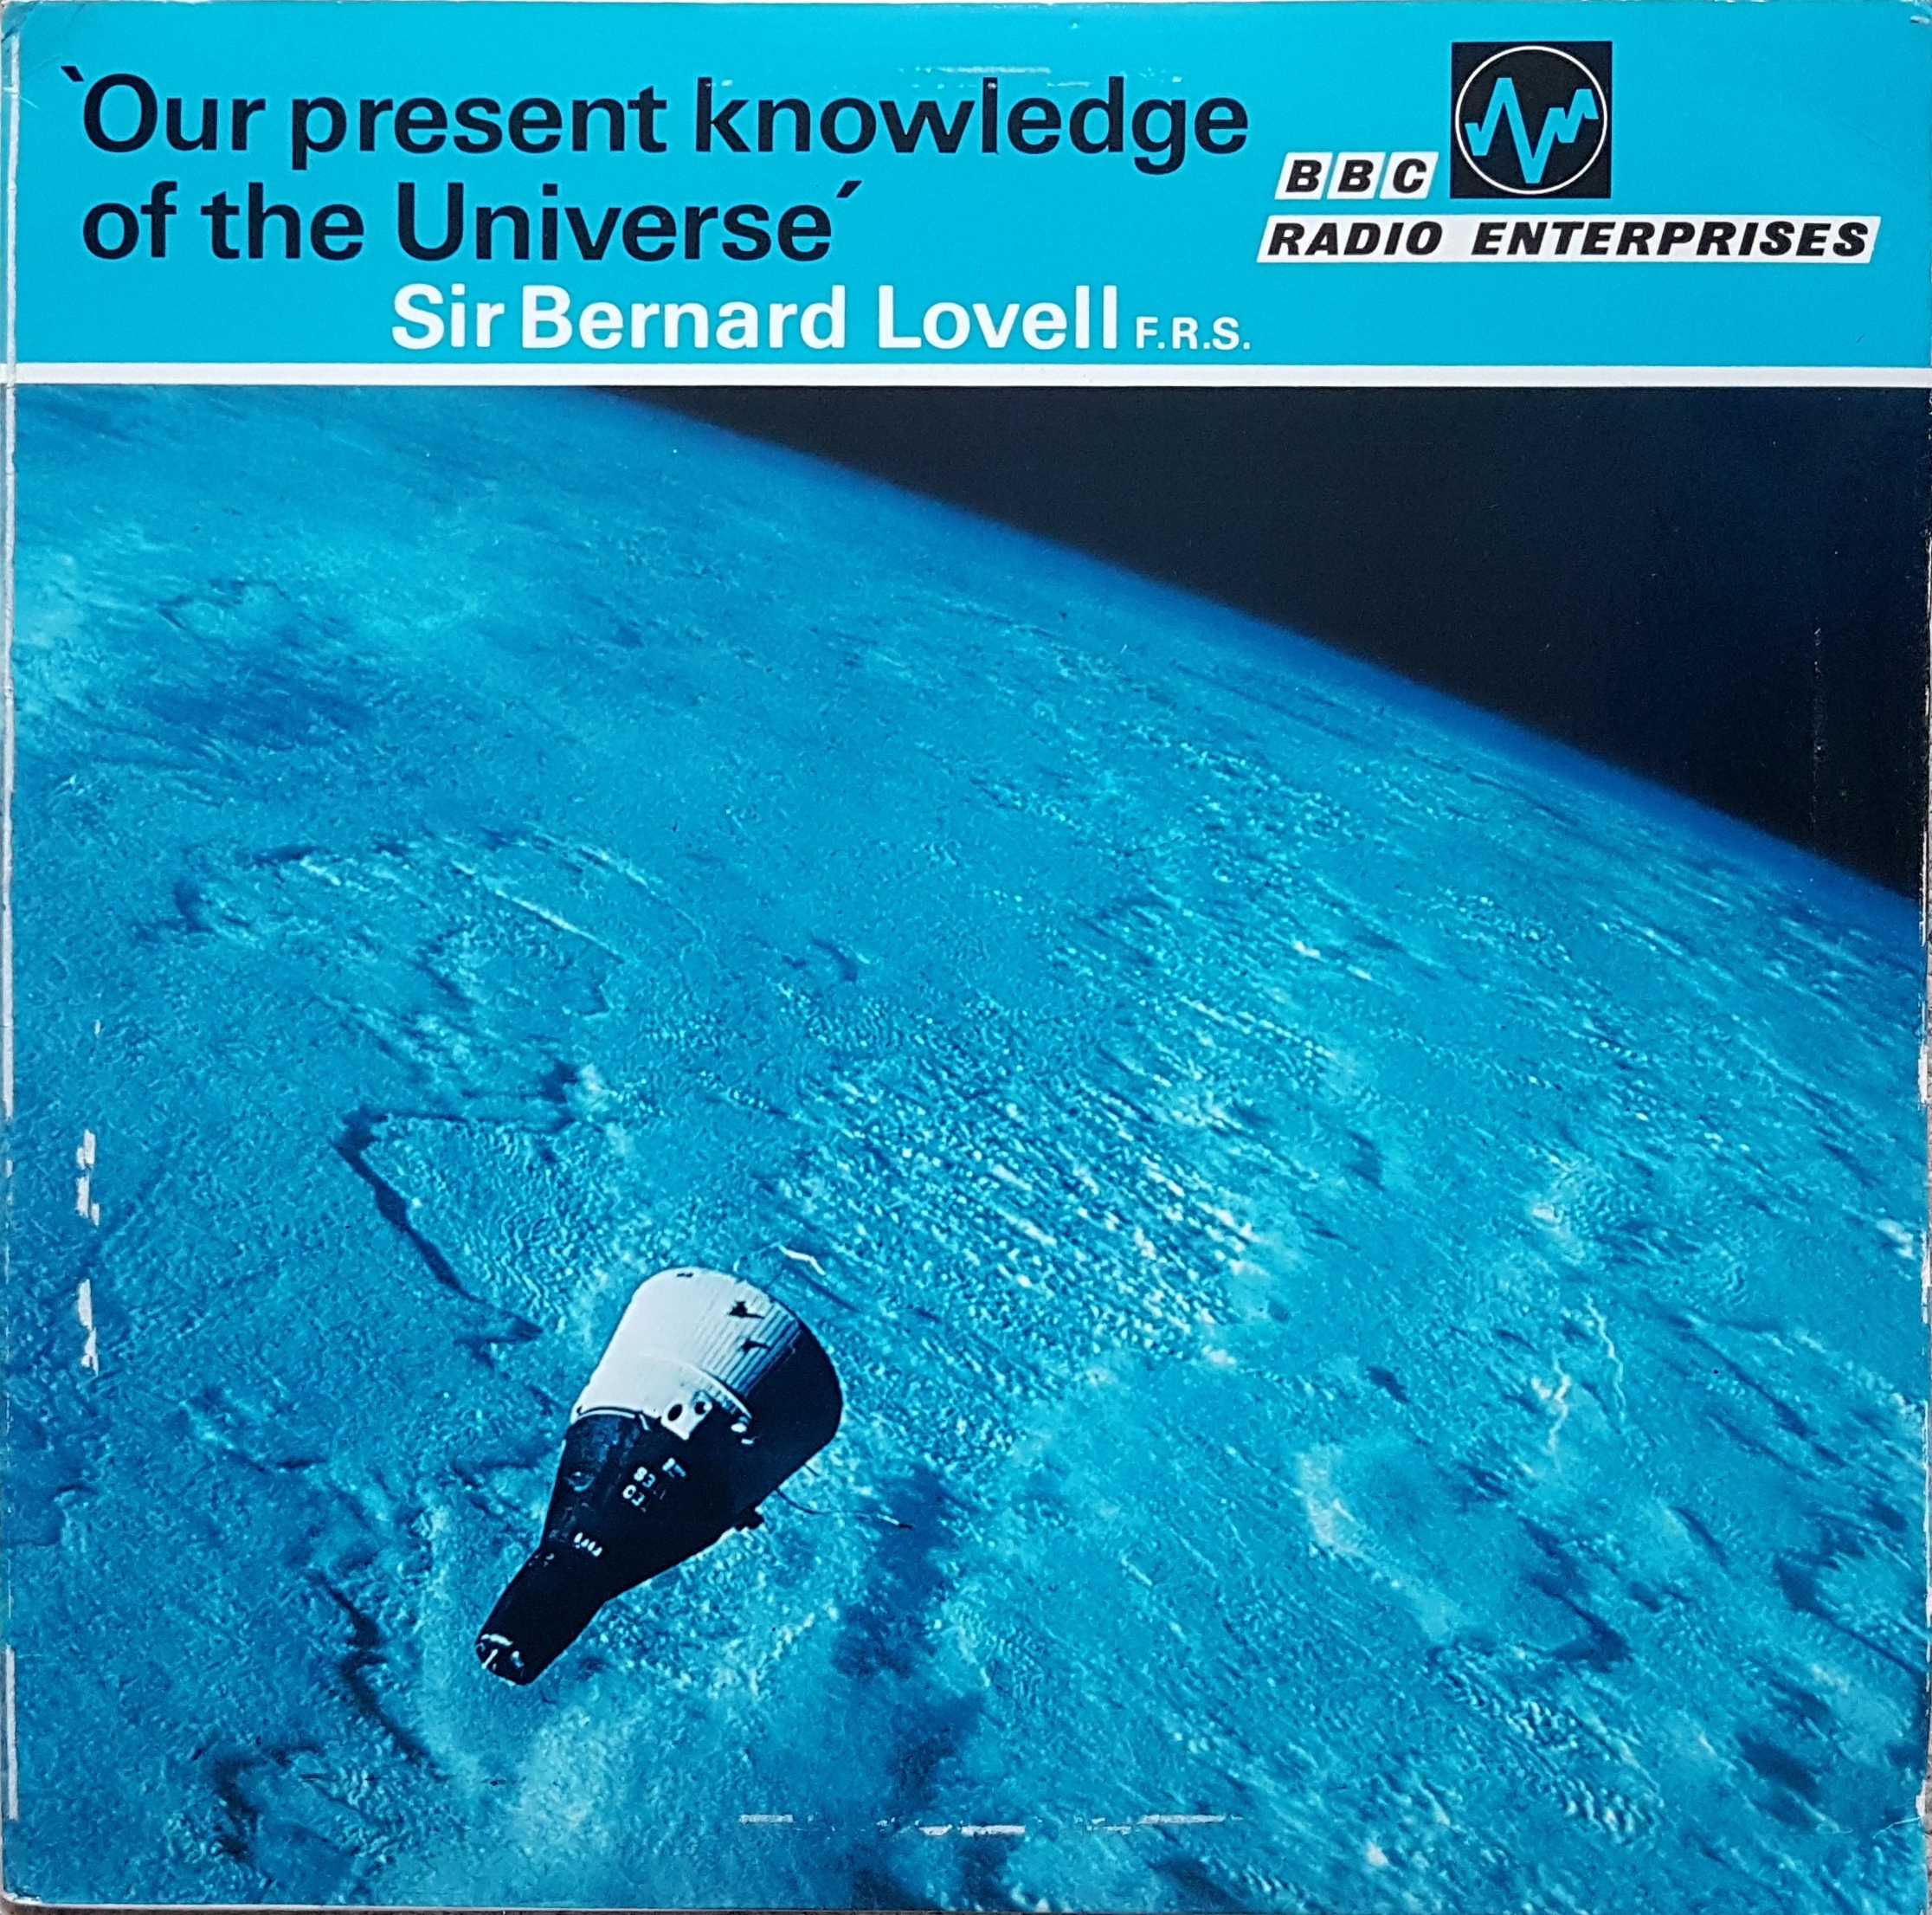 Picture of REA 1 Our present knowledge of the Universe by artist Sir Bernard Lovell from the BBC albums - Records and Tapes library